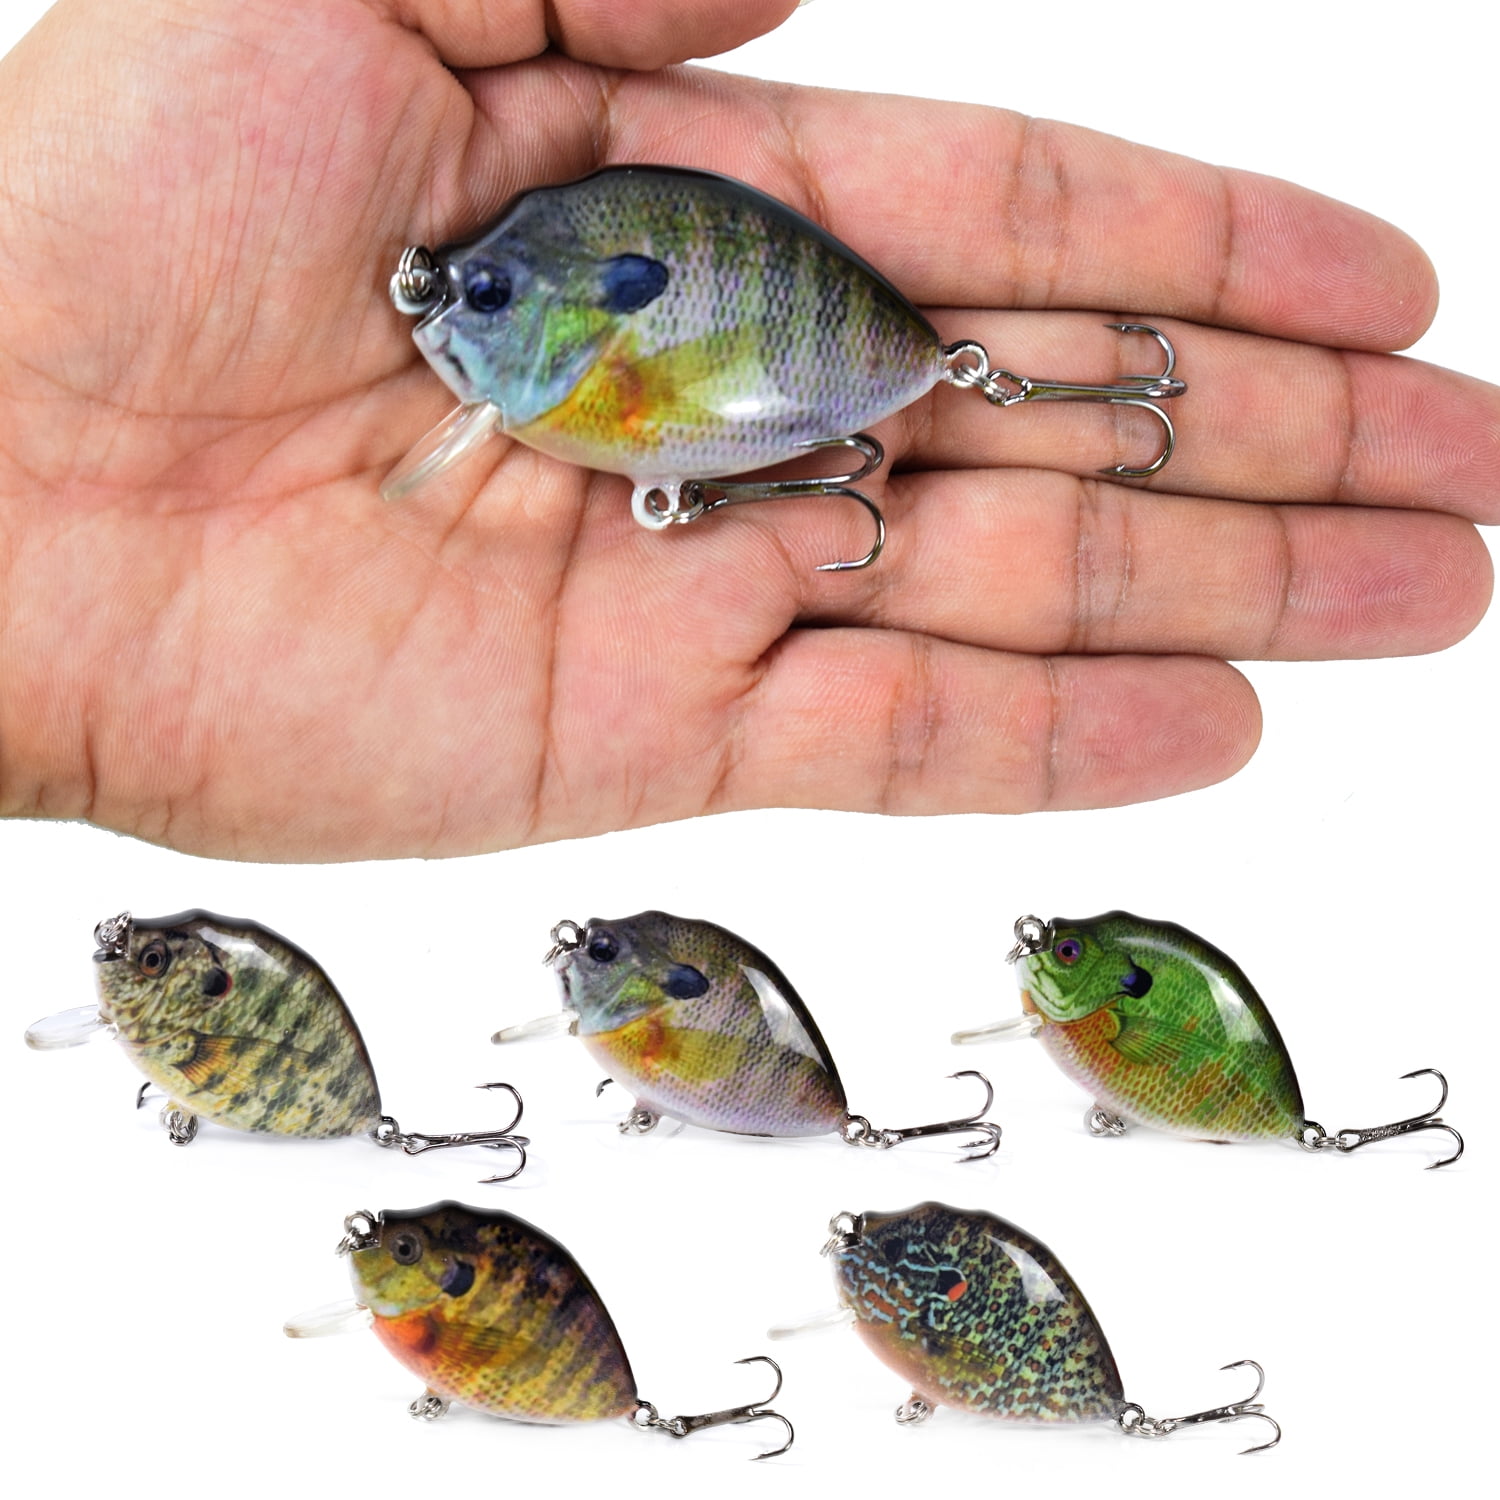 5Pcs Soft Fishing Lure Bait Lead Head Lures Bass Fishing Tackle with Hooks 